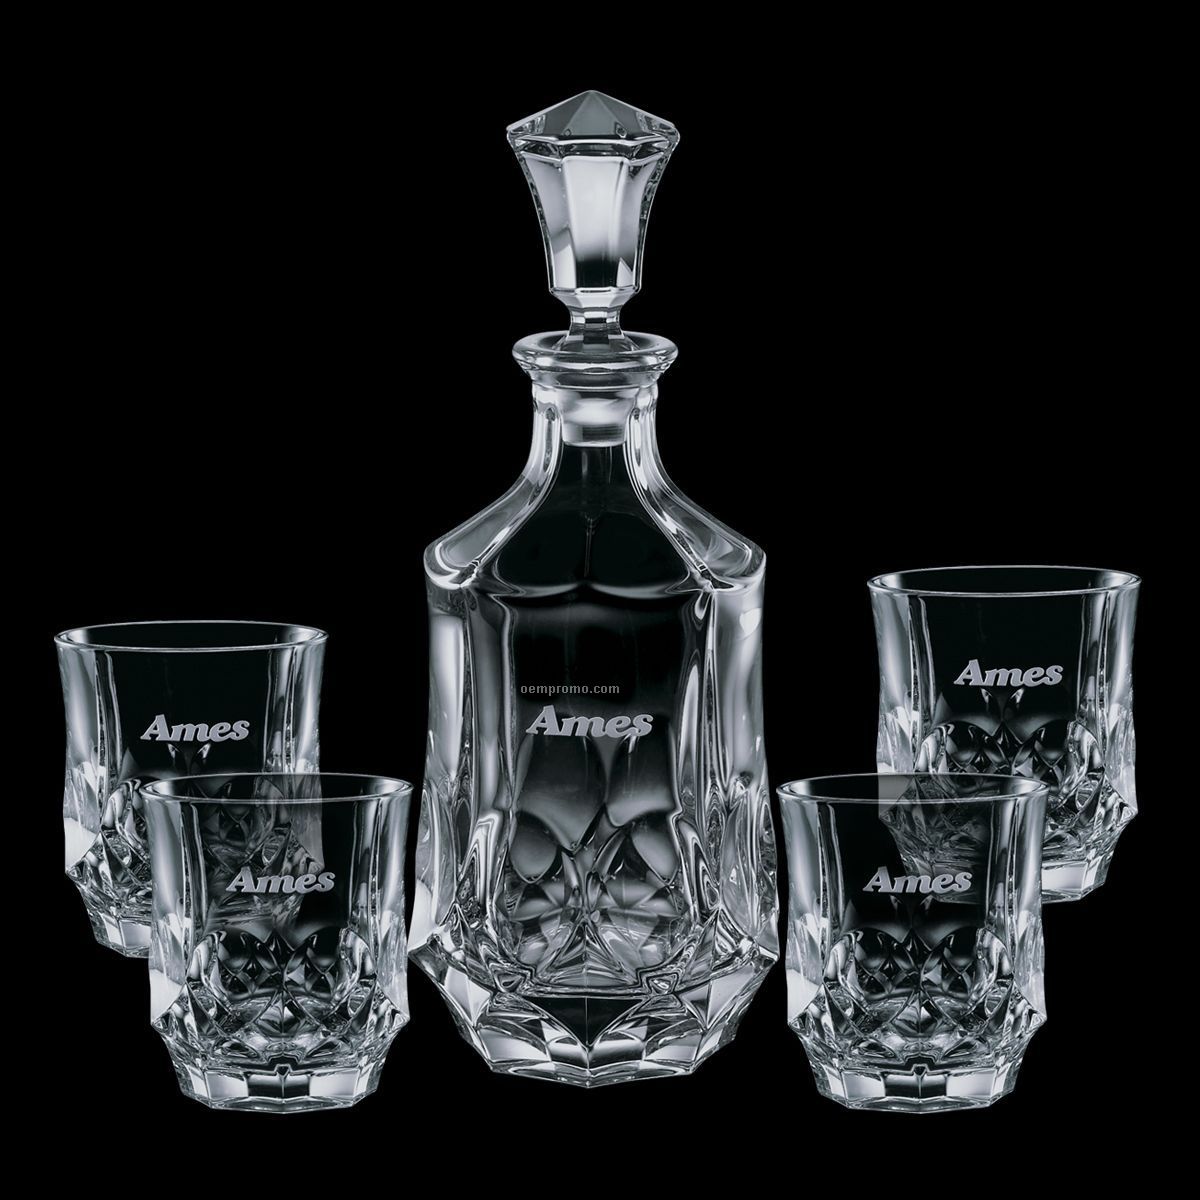 25 Oz. Foxborough Crystal Decanter With 4 On The Rocks Glasses